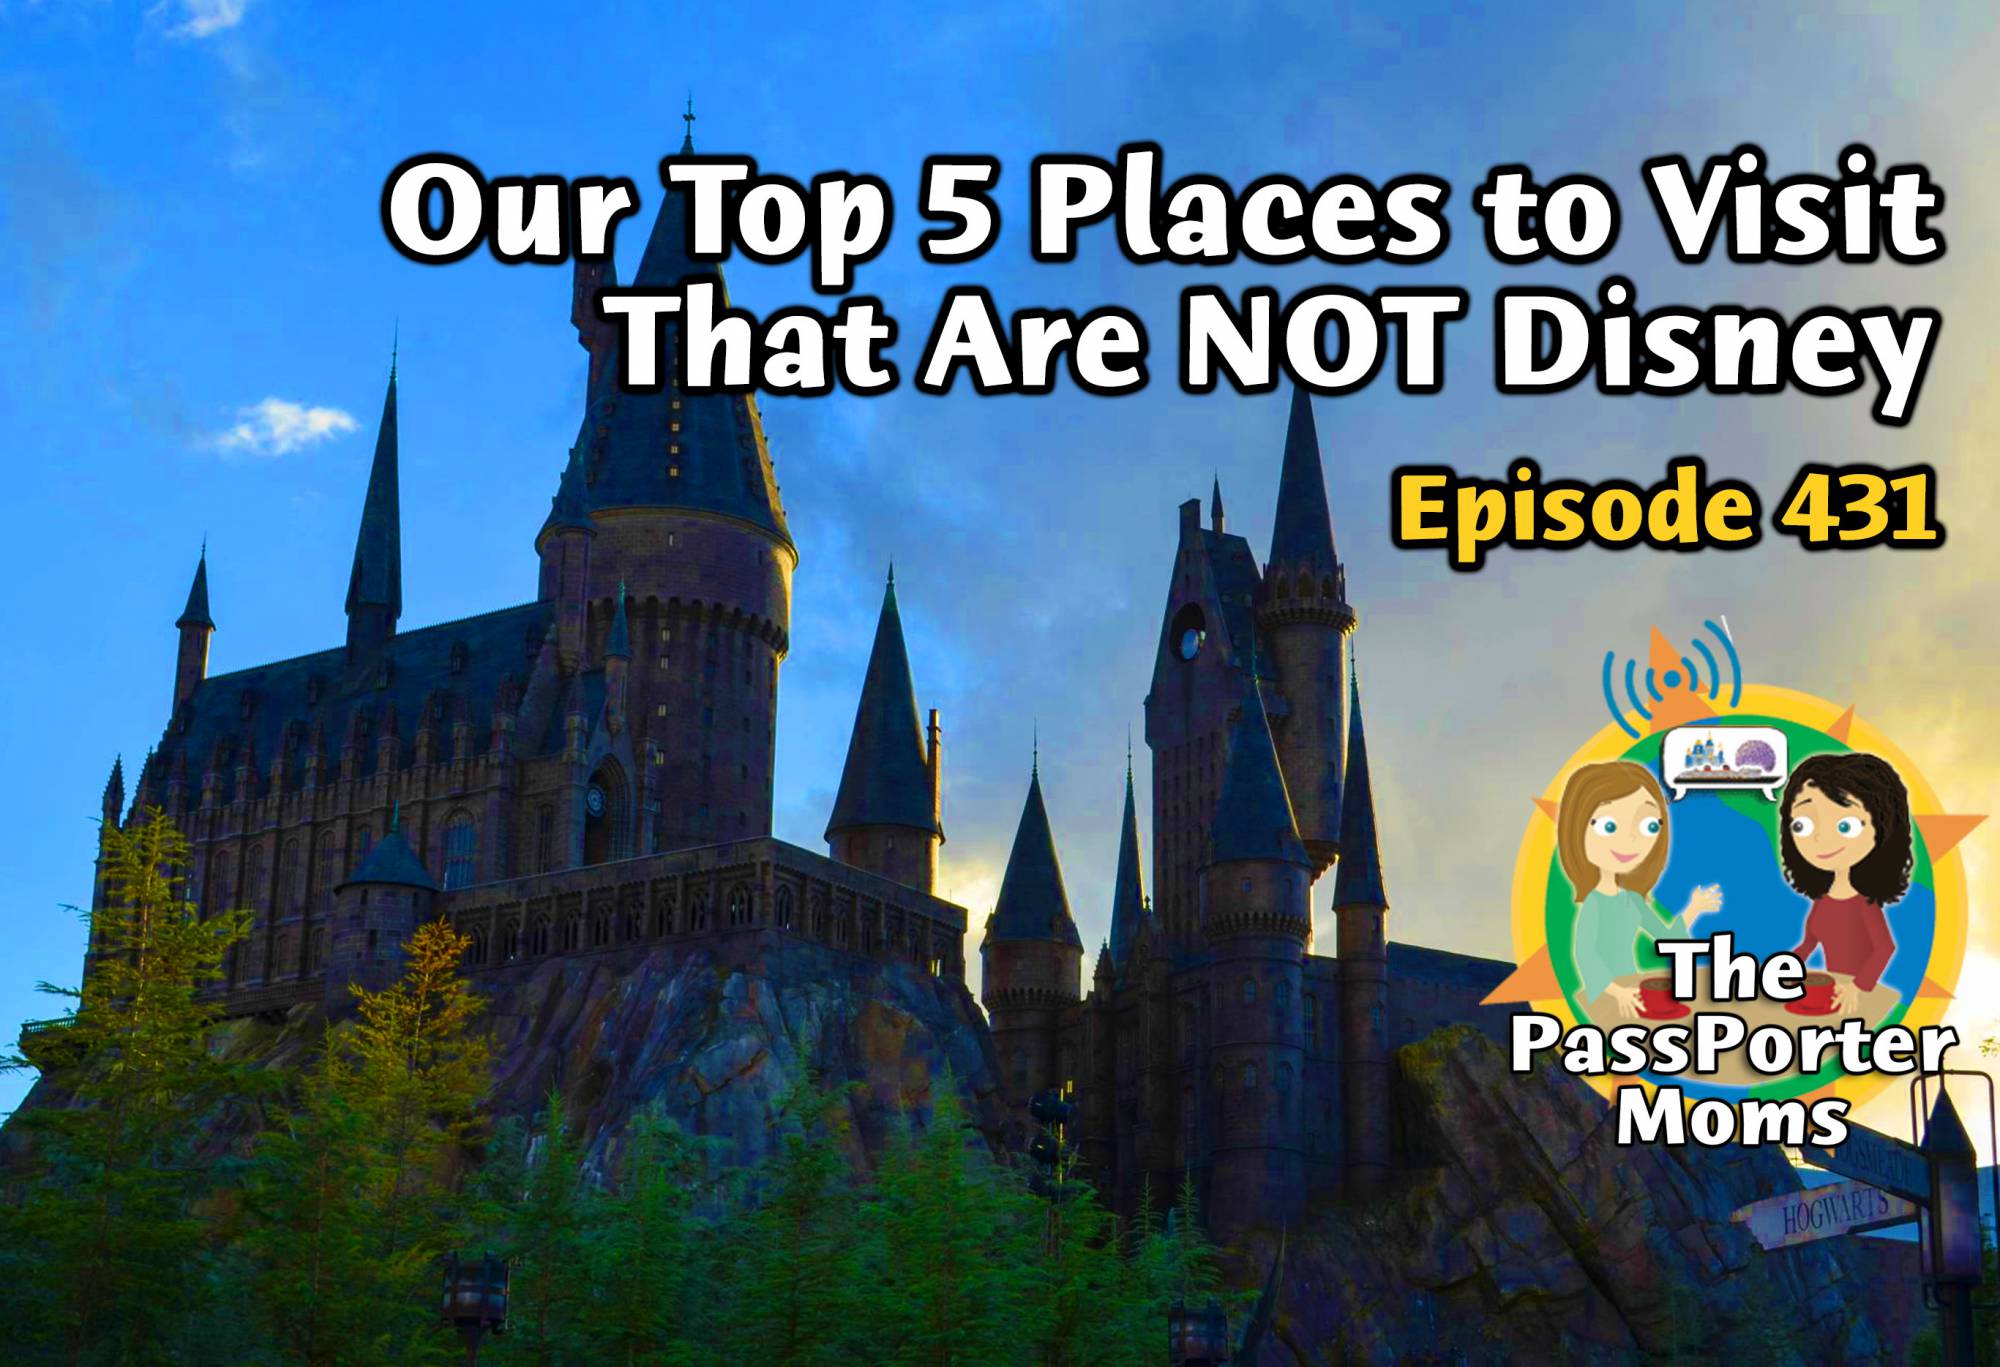 Top 5 Places to Visit that are NOT Disney